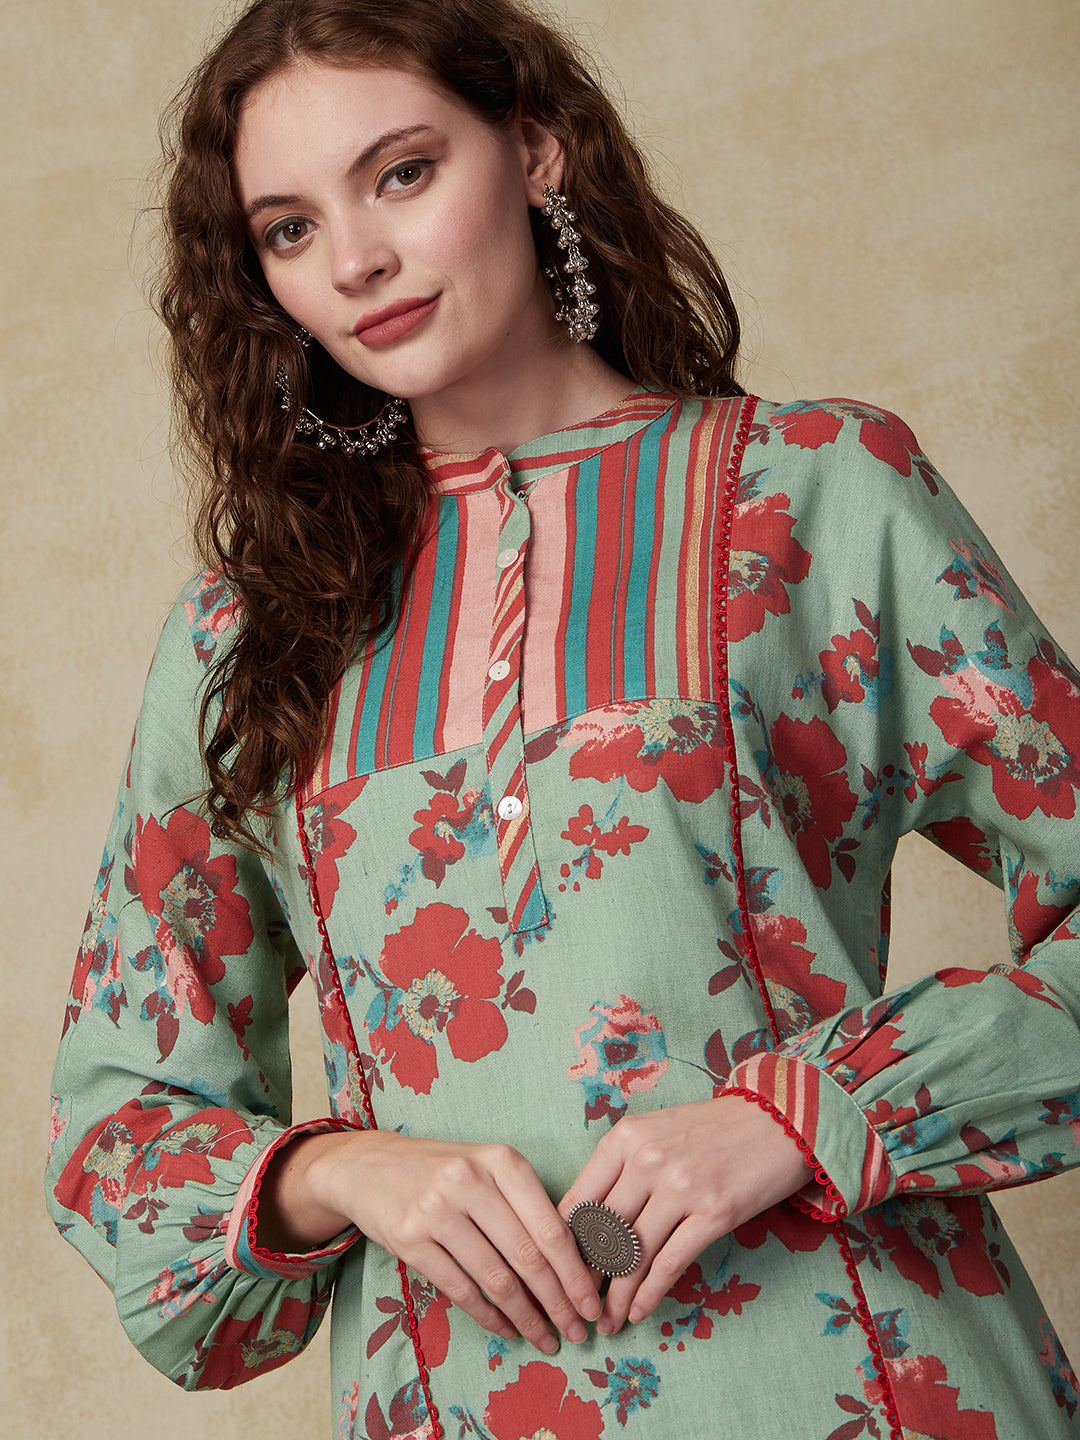 Floral & Stripes Printed A-Line Paneled Kurta with Pant - Mint Green